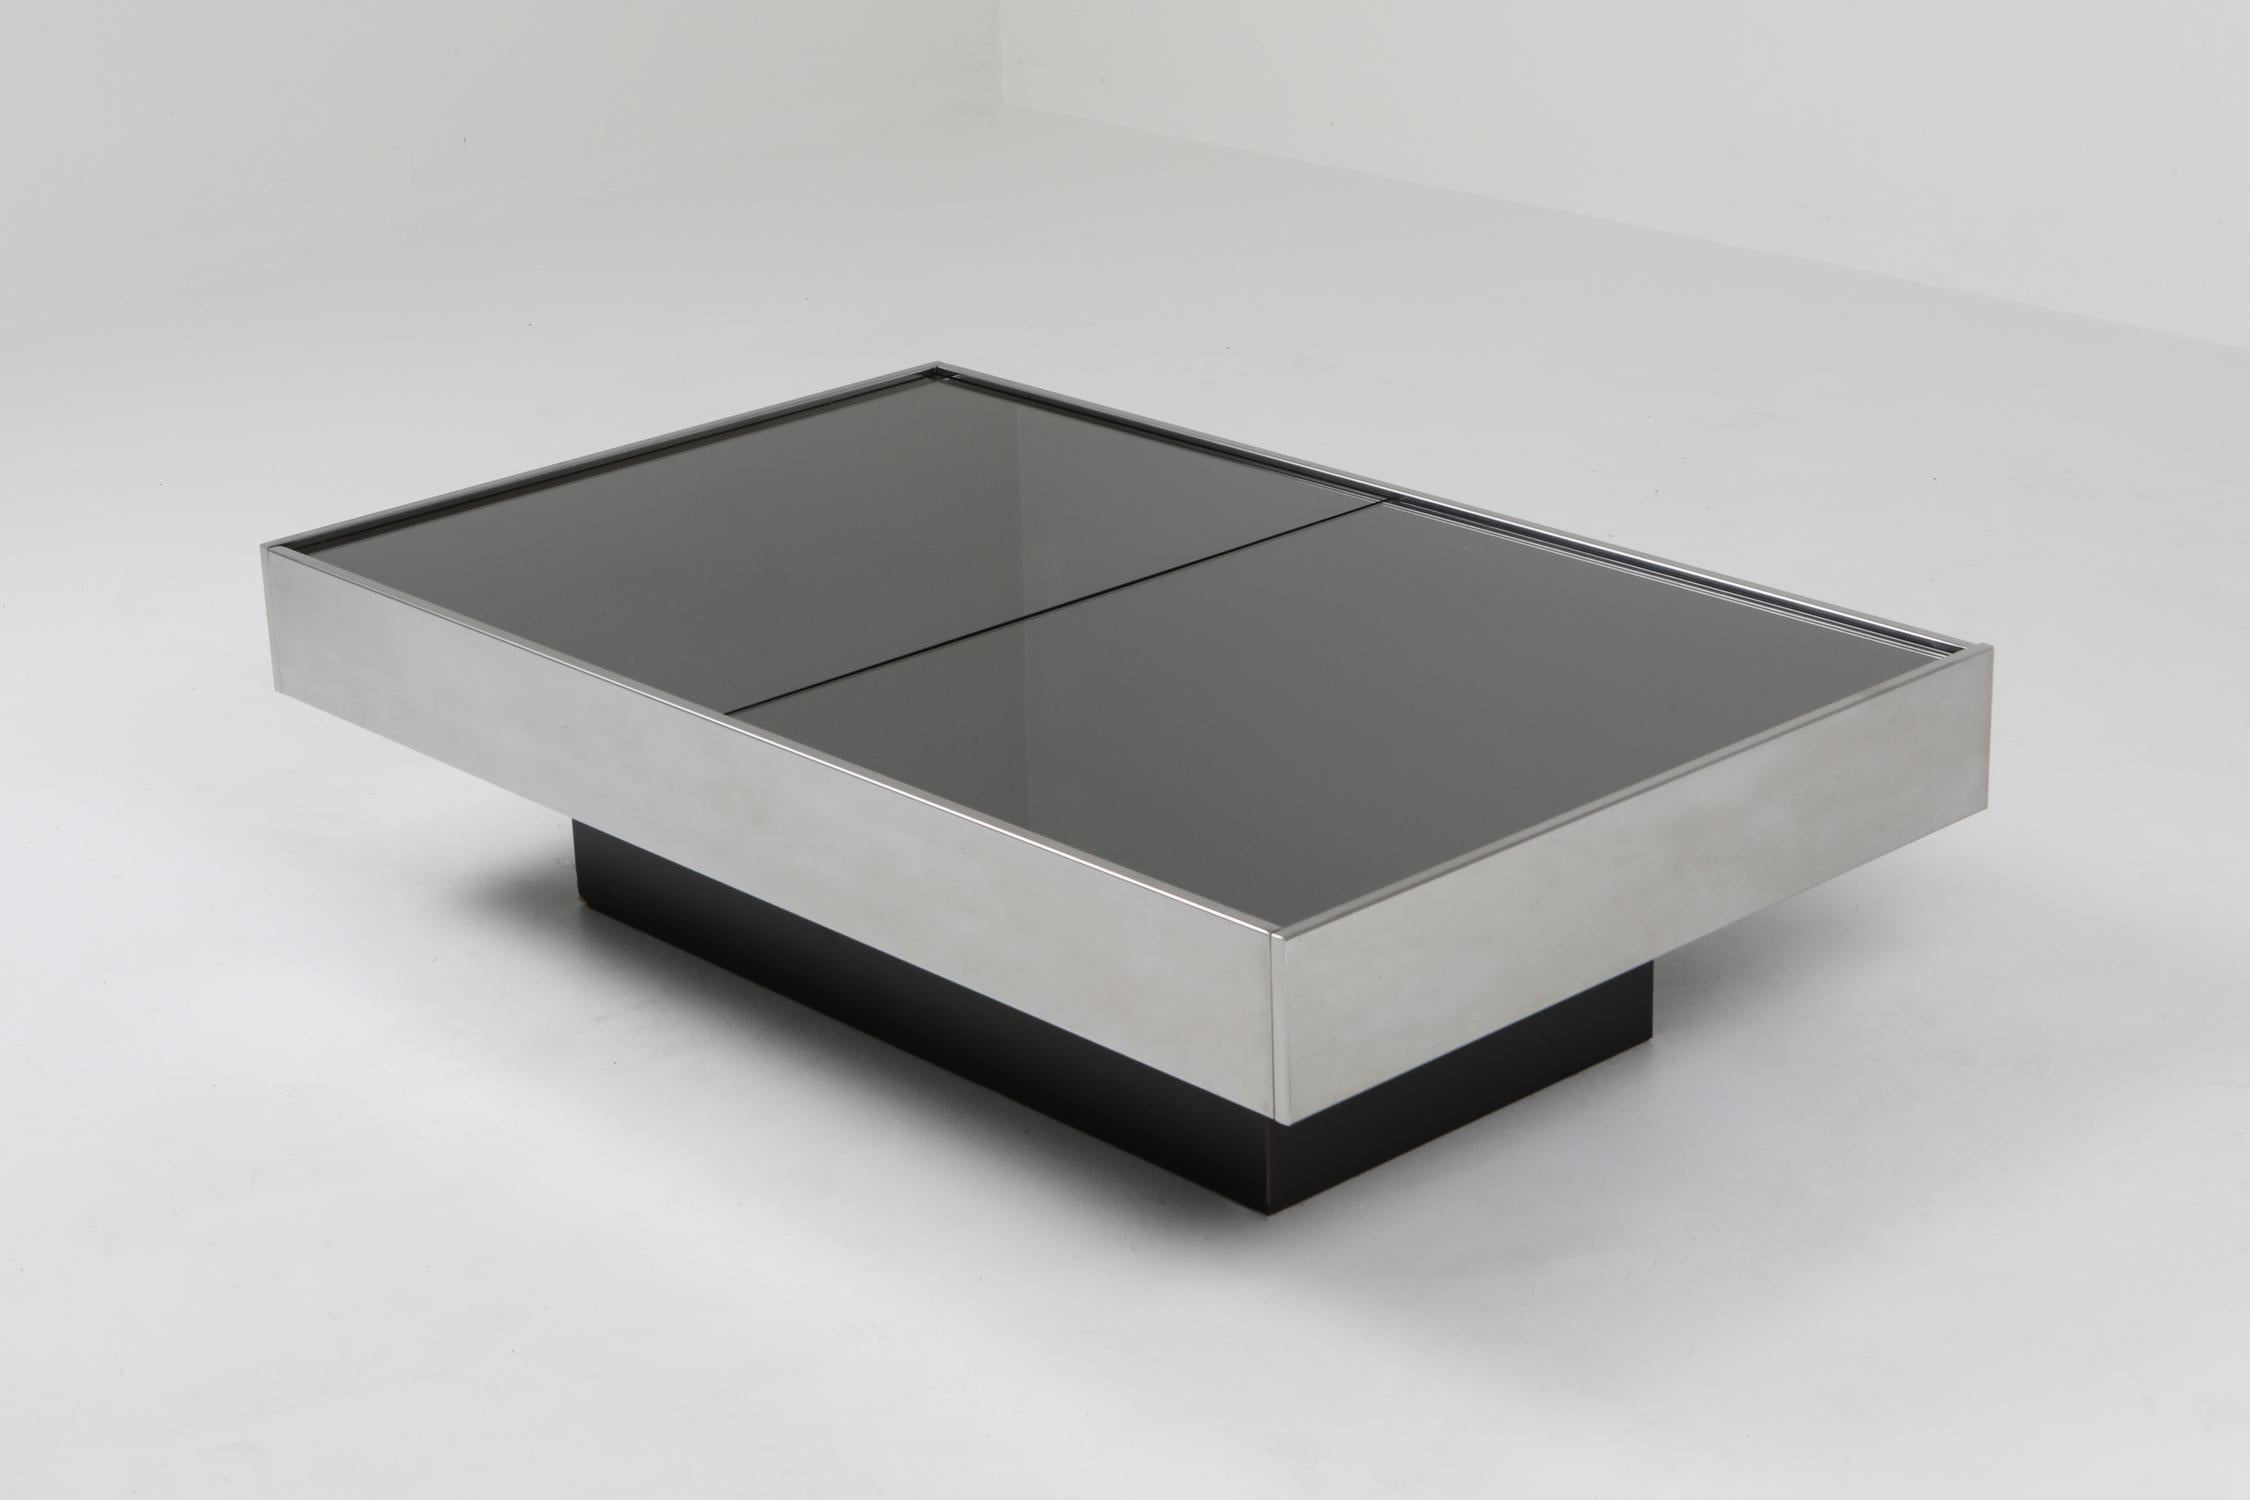 Postmodern coffee table, Willy Rizzo, Cidue, Italy, 1970s

Italian glam piece that fits well in a Hollywood Regency inspired eclectic decor.
Rectangular coffee table on a black laminate base, chromed steel frame and silver mirrored glass top